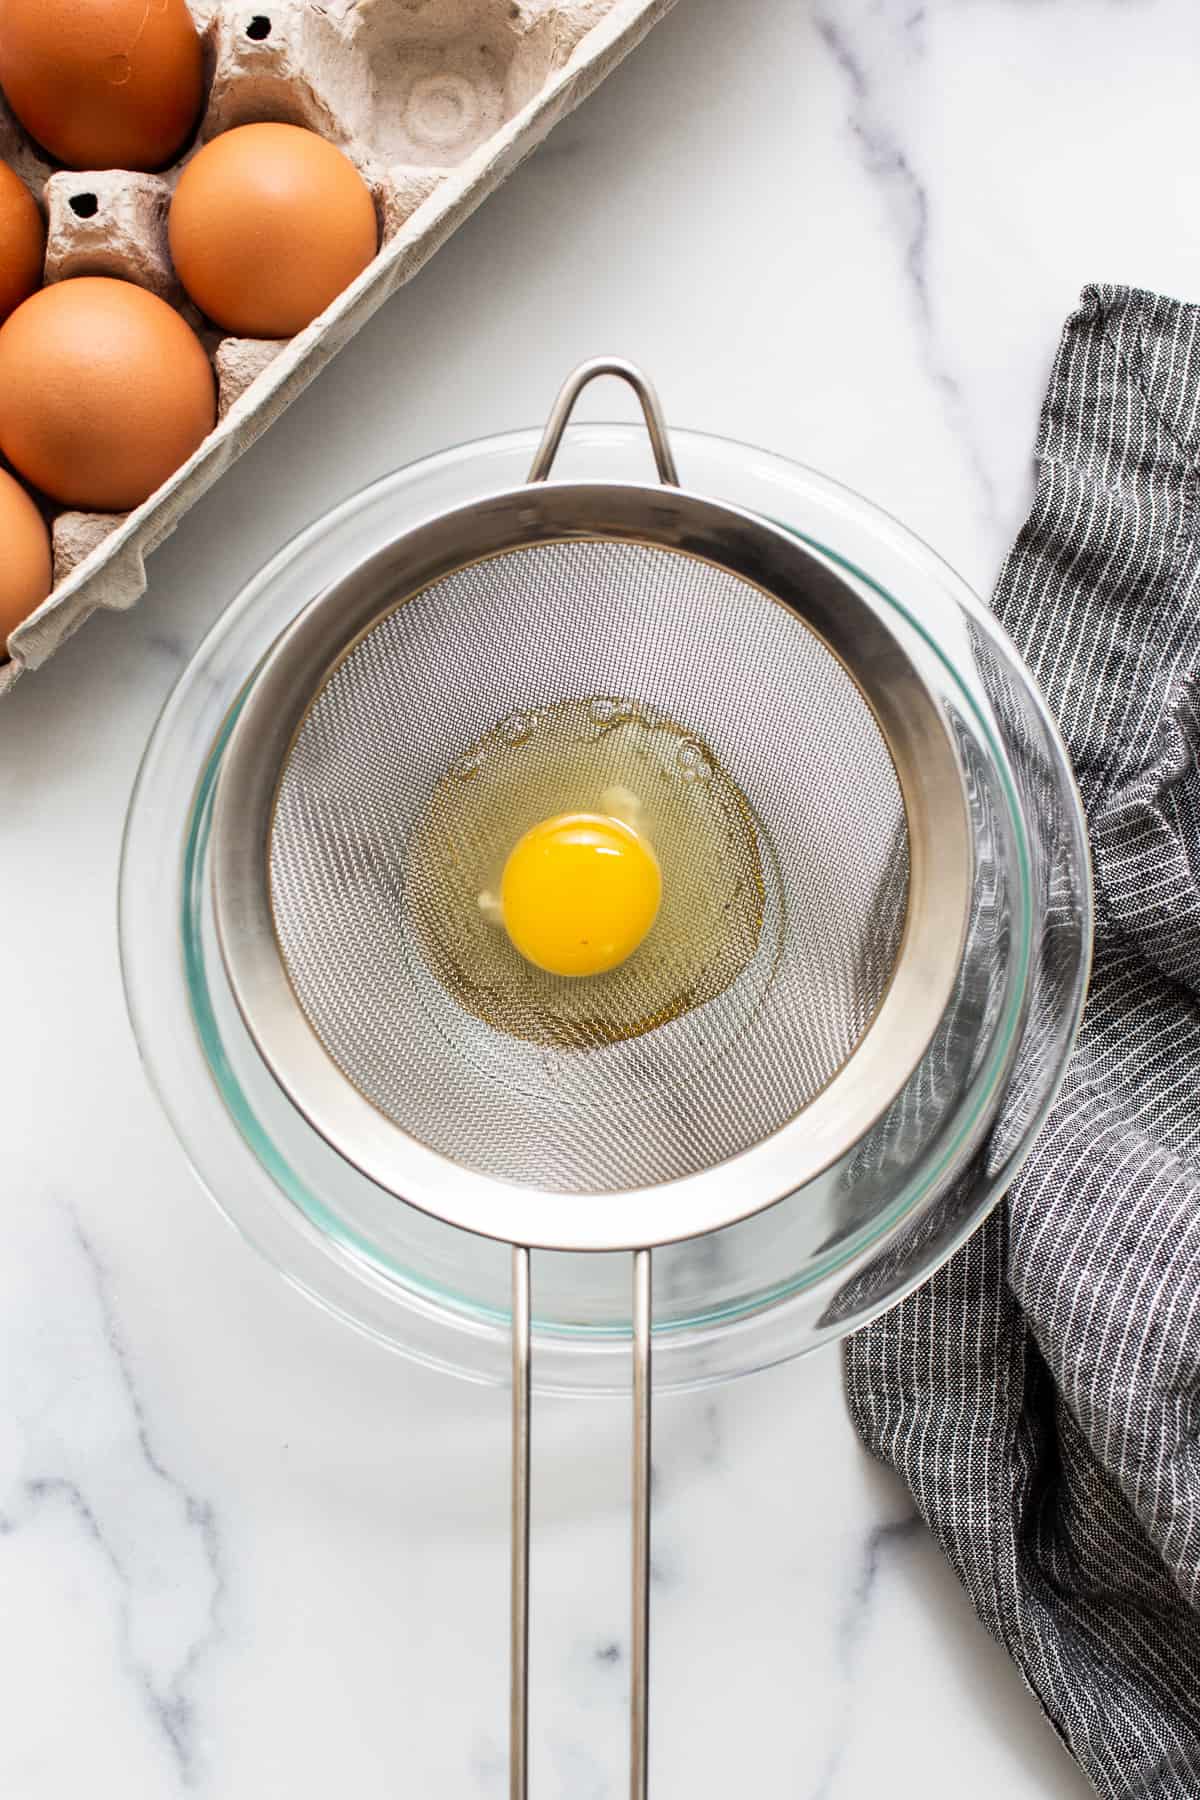 Raw egg in a mesh strainer.